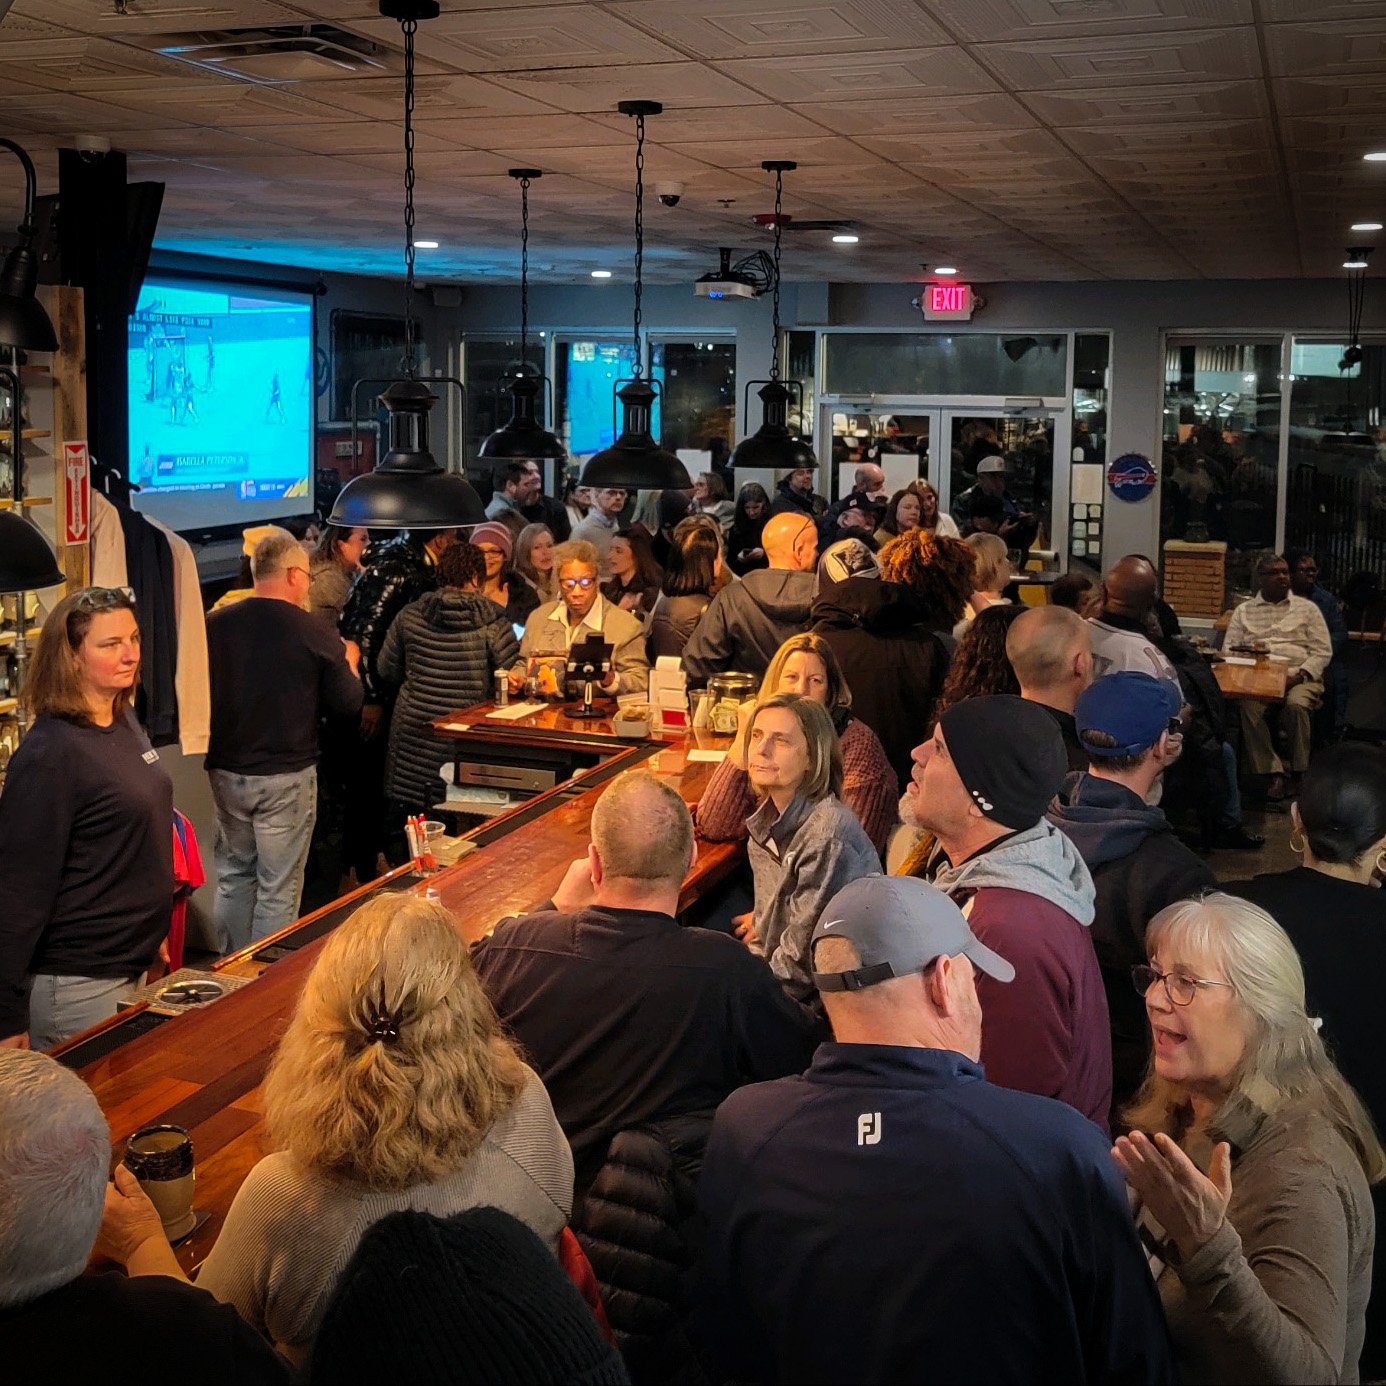 Nothing says community like a full bar, good food, and cold beer. Come on out! Open Tuesday - Saturday. Open until 9 tonight. Cheers!